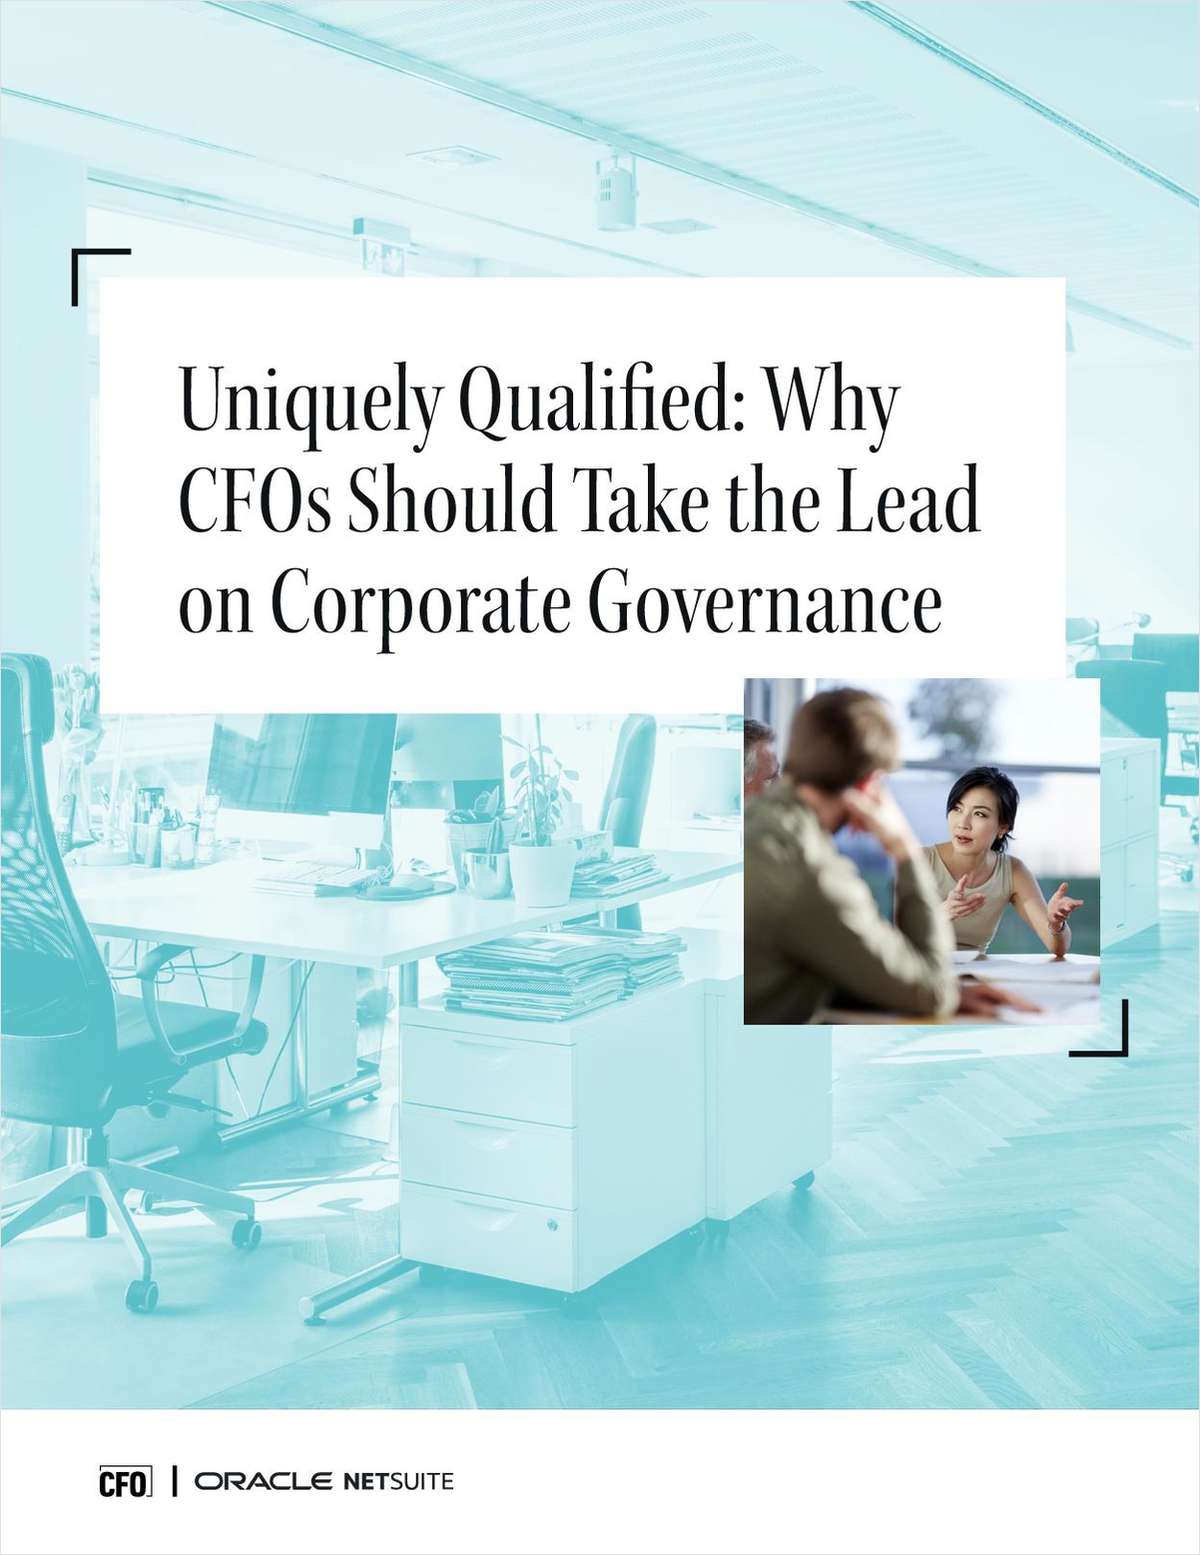 Why CFOs Should Take the Lead on Corporate Governance